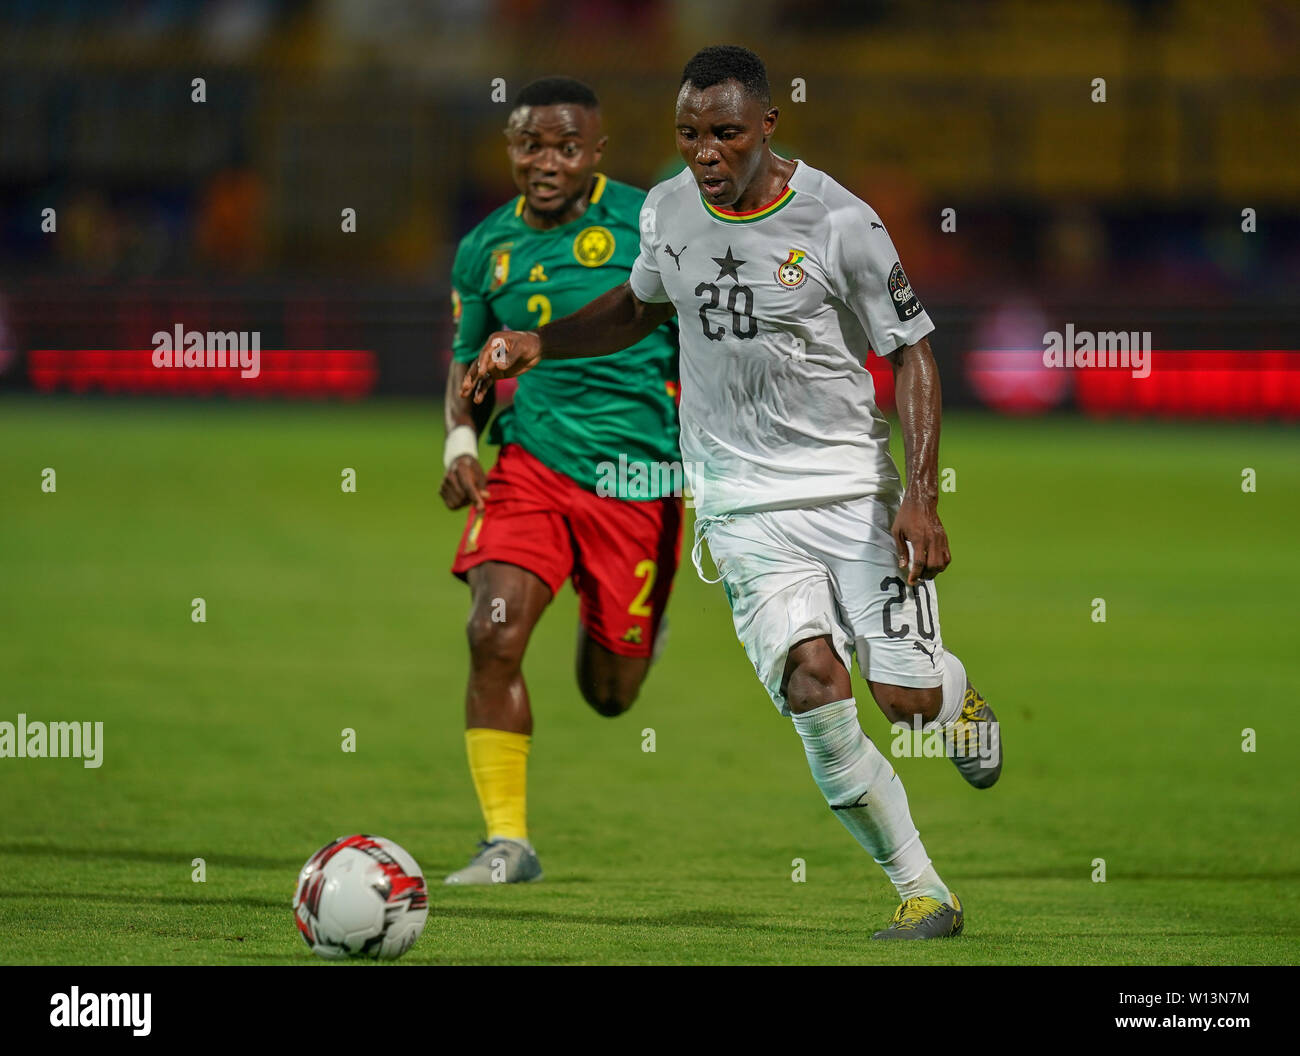 Ismailia, Egypt. 29th June, 2019. Kwadwo Asamoah of Ghana going past Ngoran Suiru Fai Collins of Cameroon during the 2019 African Cup of Nations match between Benin and Guinea-Bissau at the Ismailia stadium in Ismailia, Egypt. Ulrik Pedersen/CSM/Alamy Live News Stock Photo